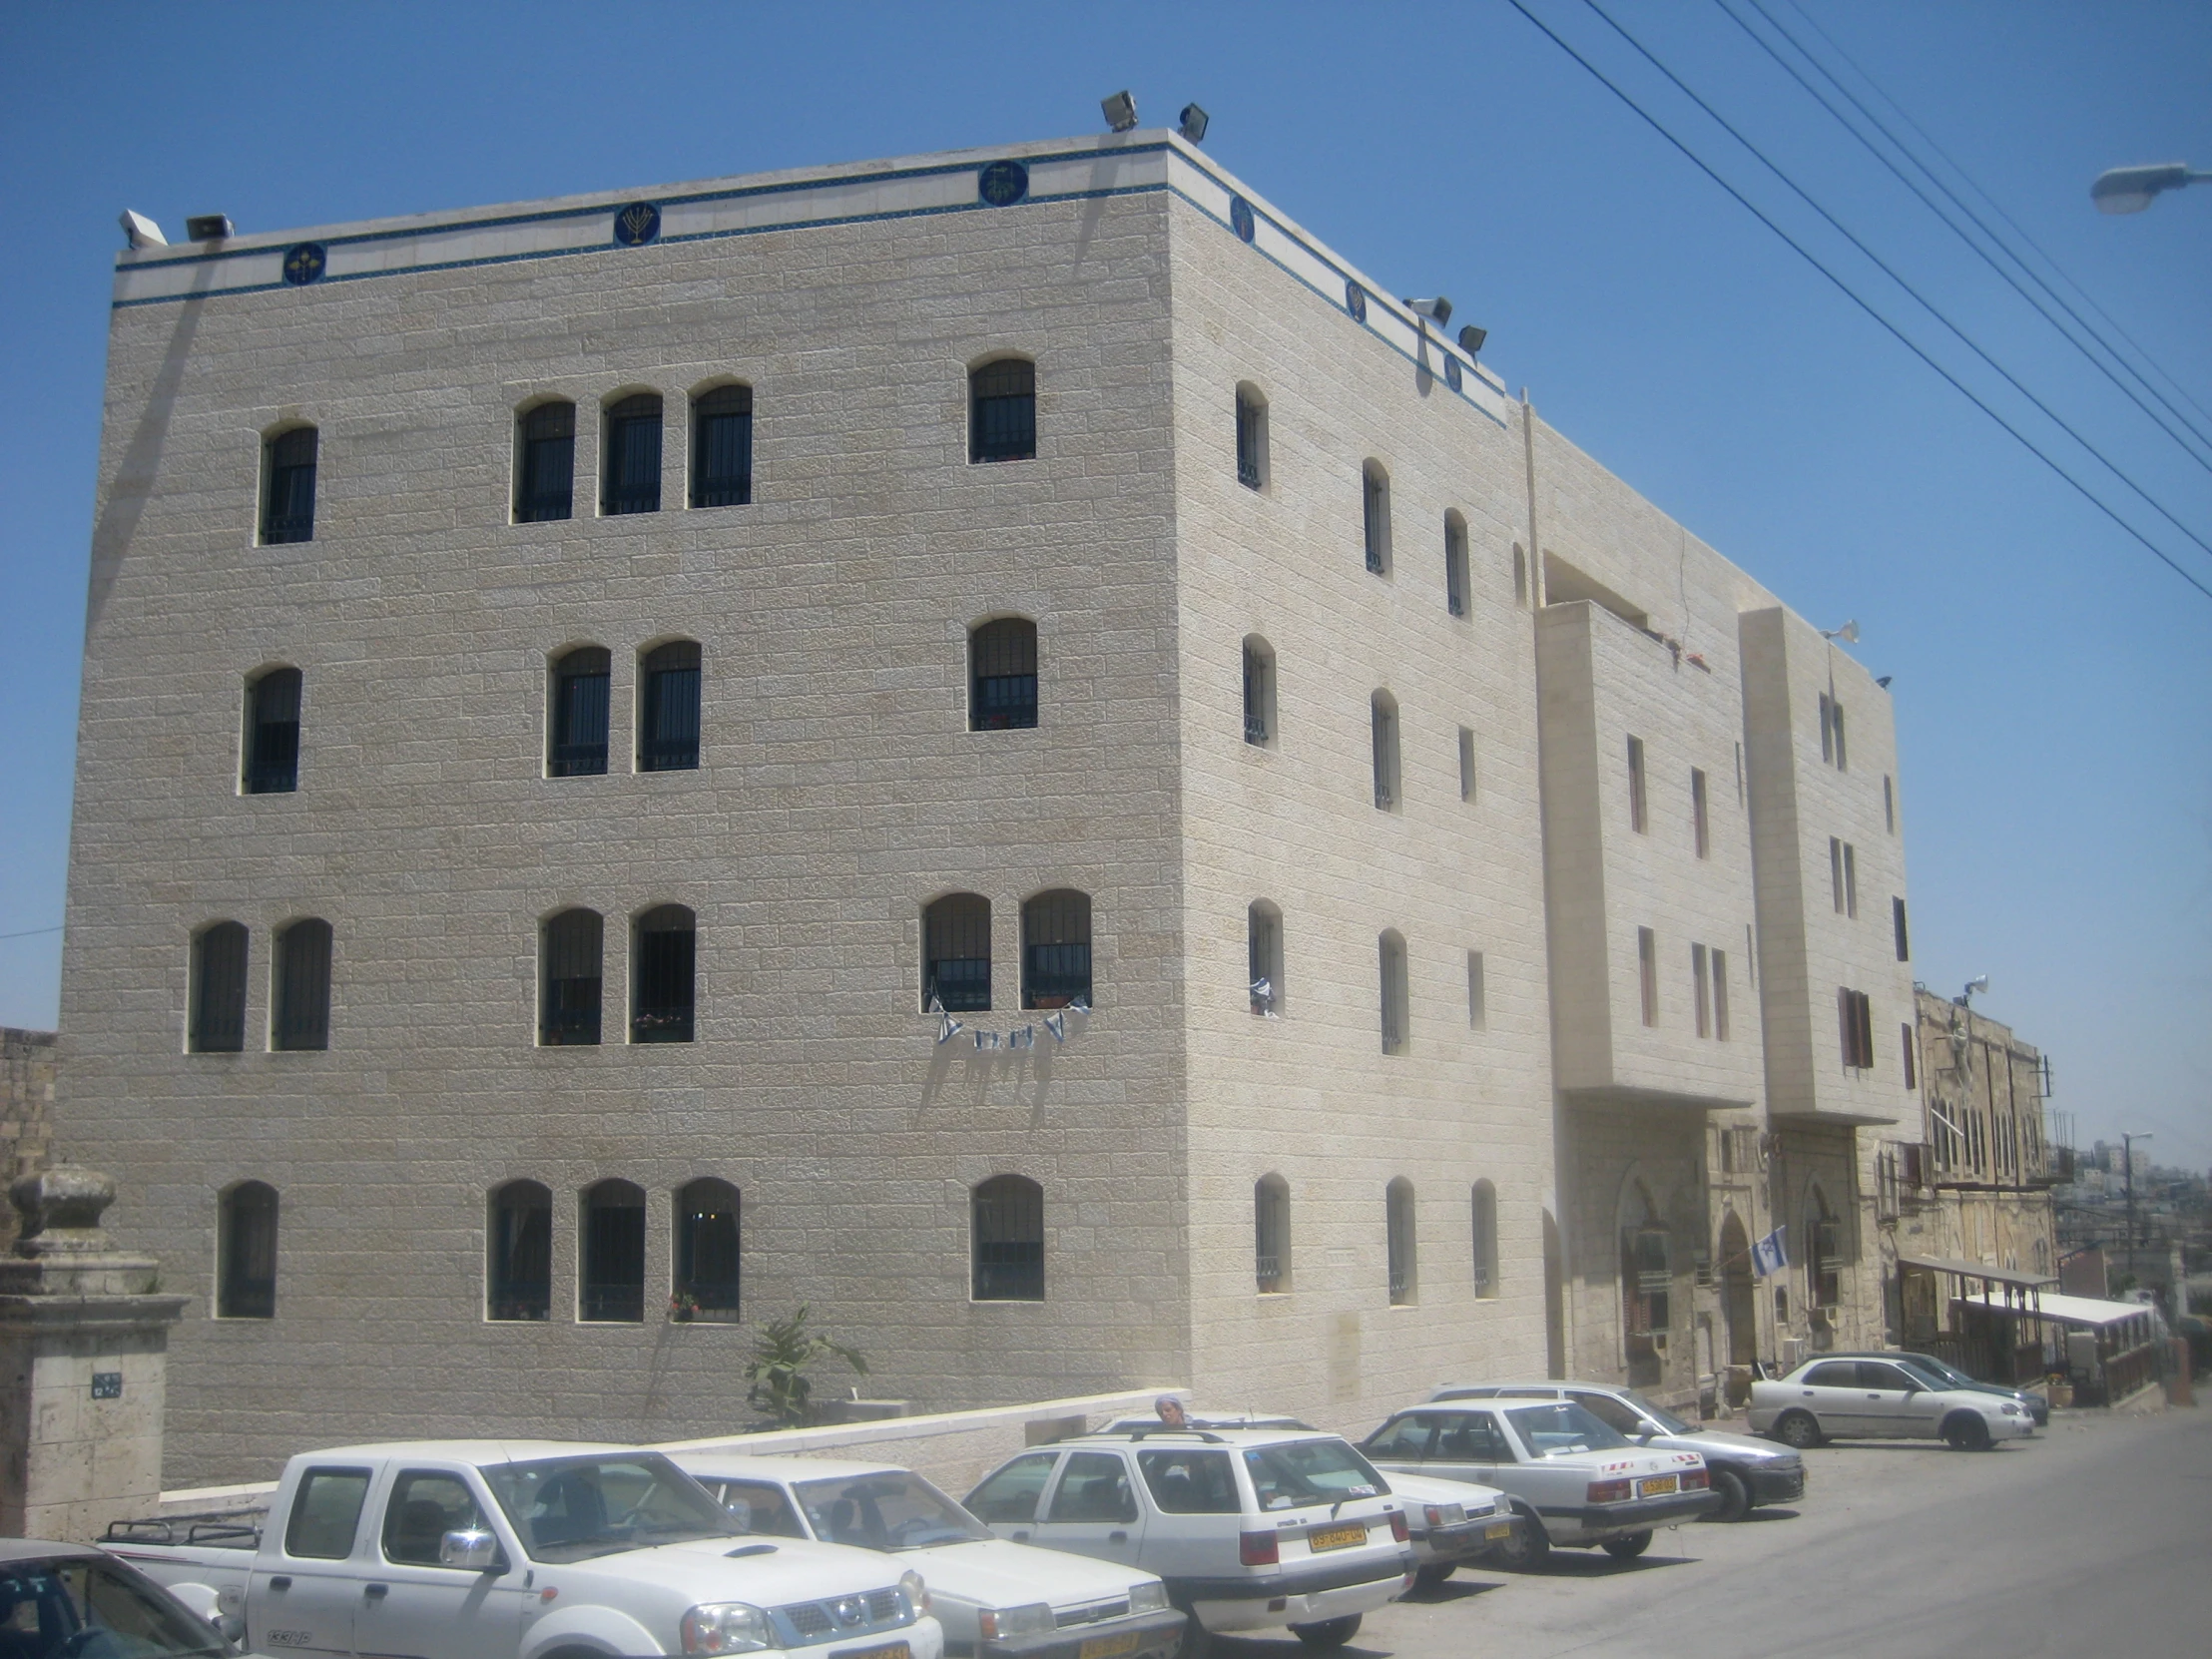 the large white building has many windows